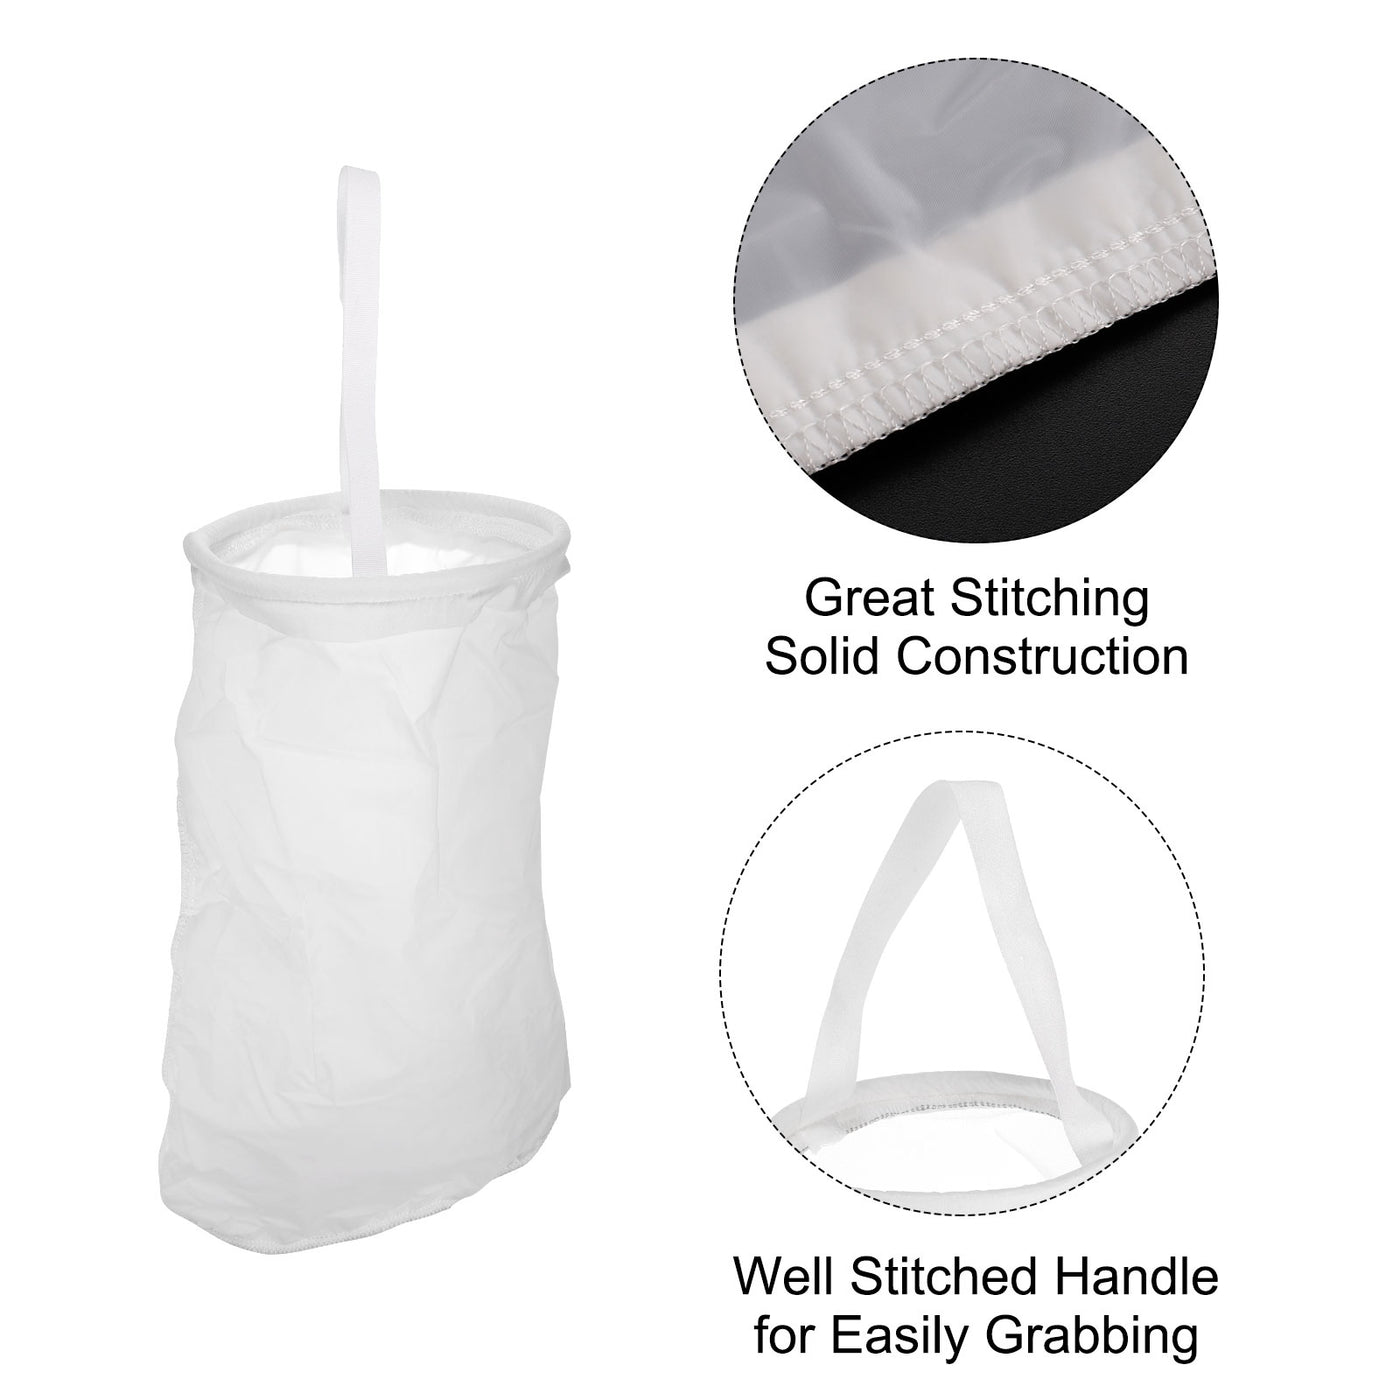 uxcell Uxcell Paint Filter Bag 400 Mesh (16.9"x7") Nylon Strainer for Filtering Paint